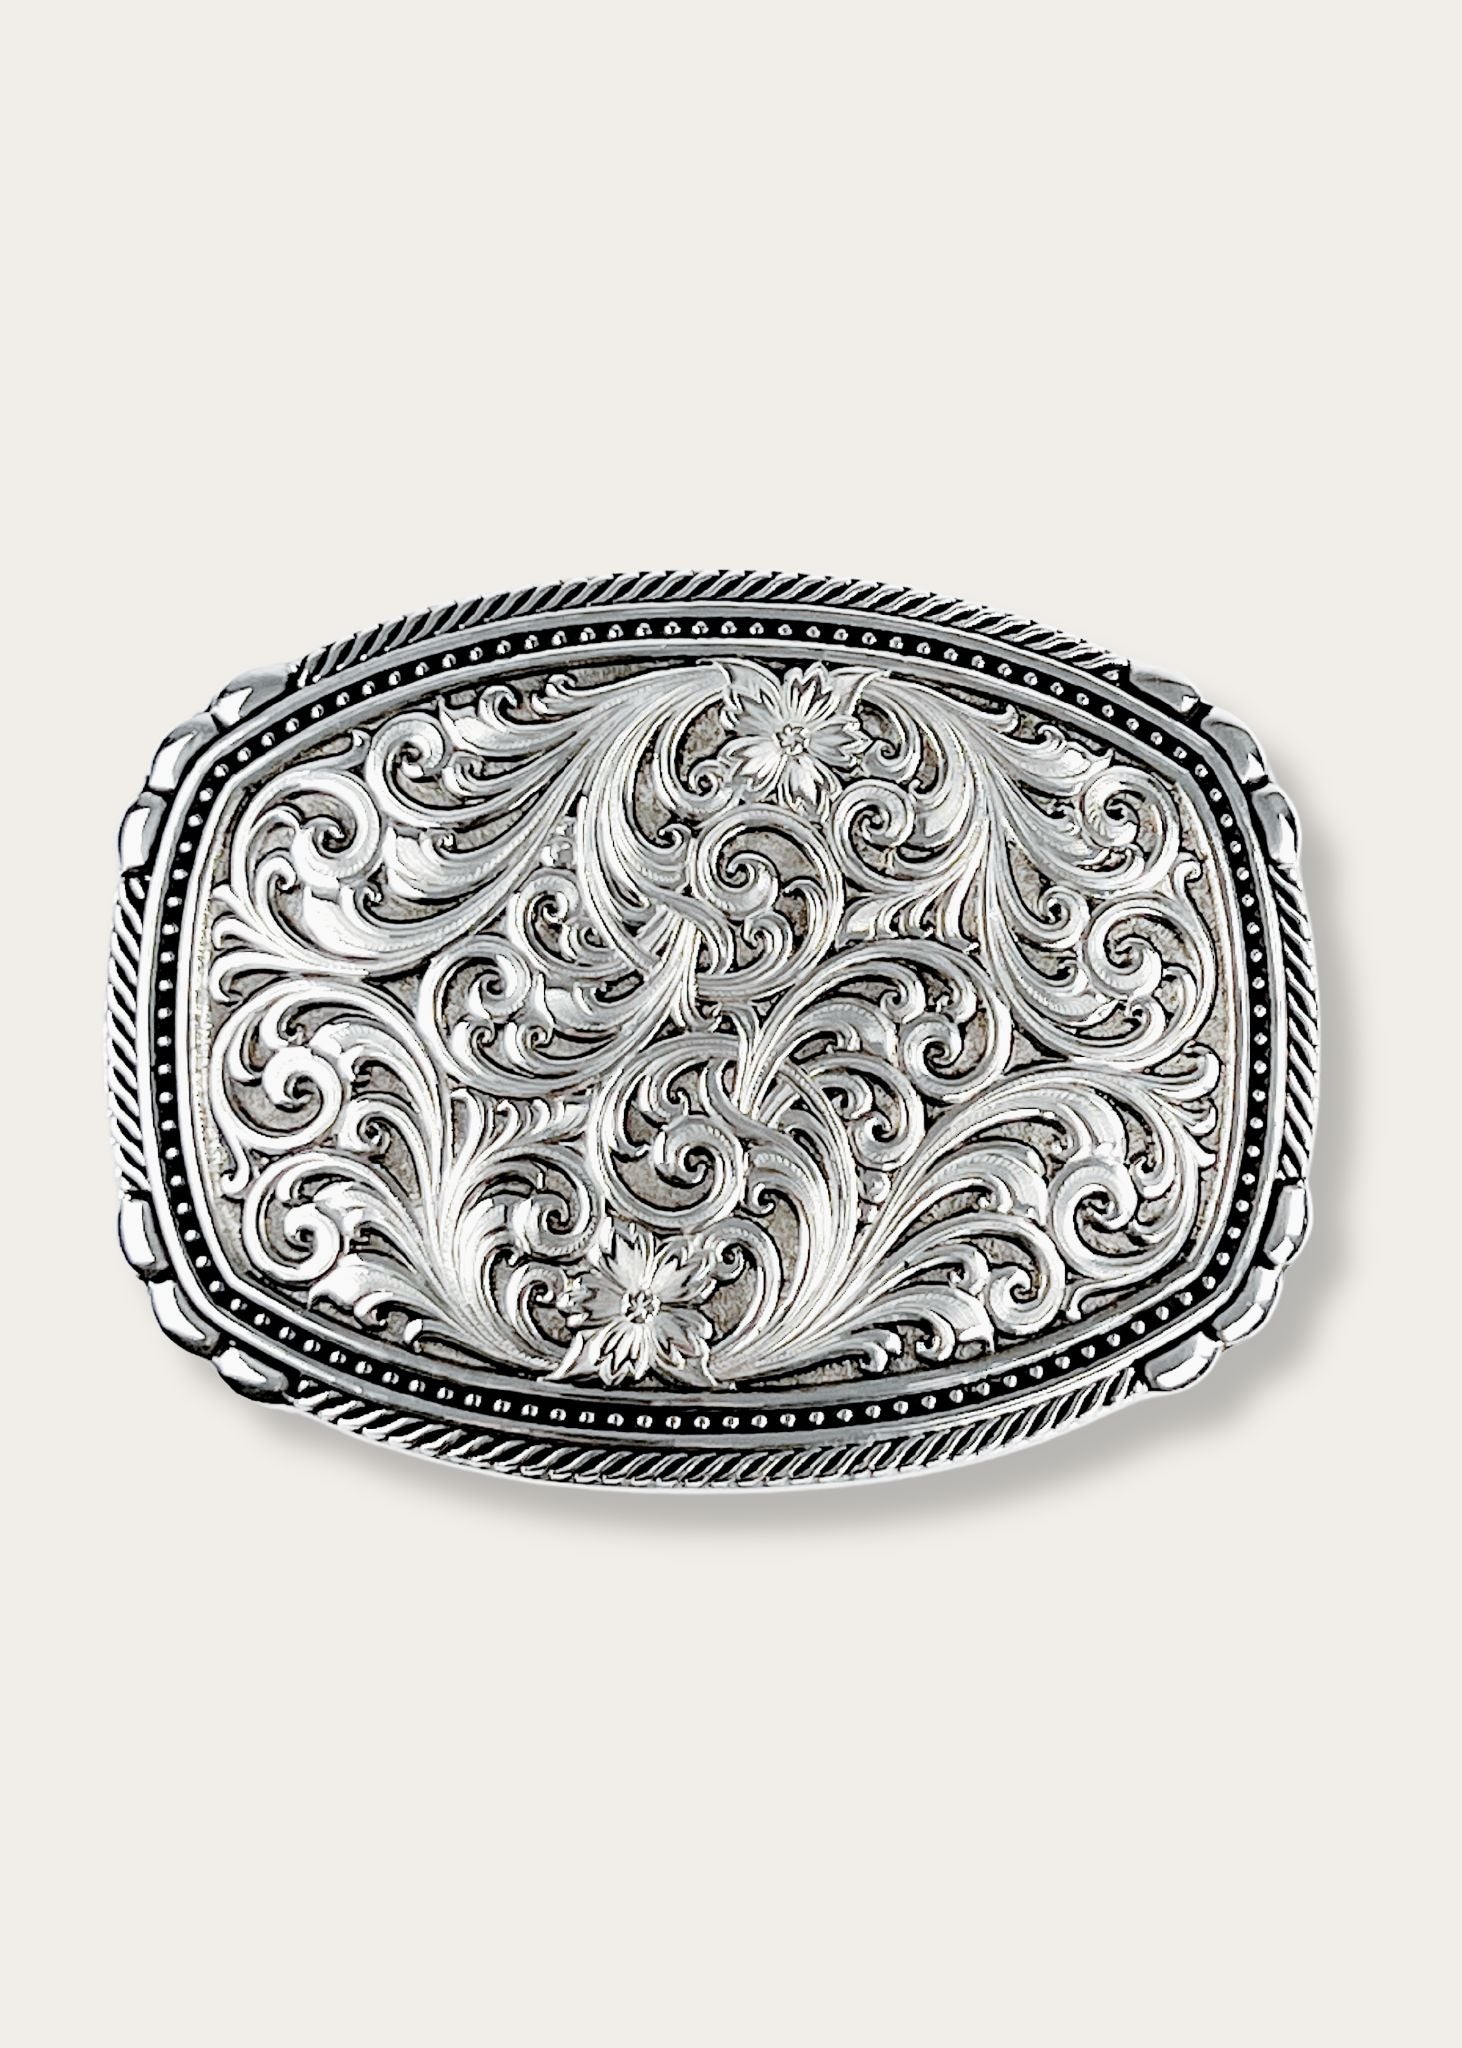 Fibbia Antiqued Pintpoints and Twisted Rope Trim di Montana Silversmith